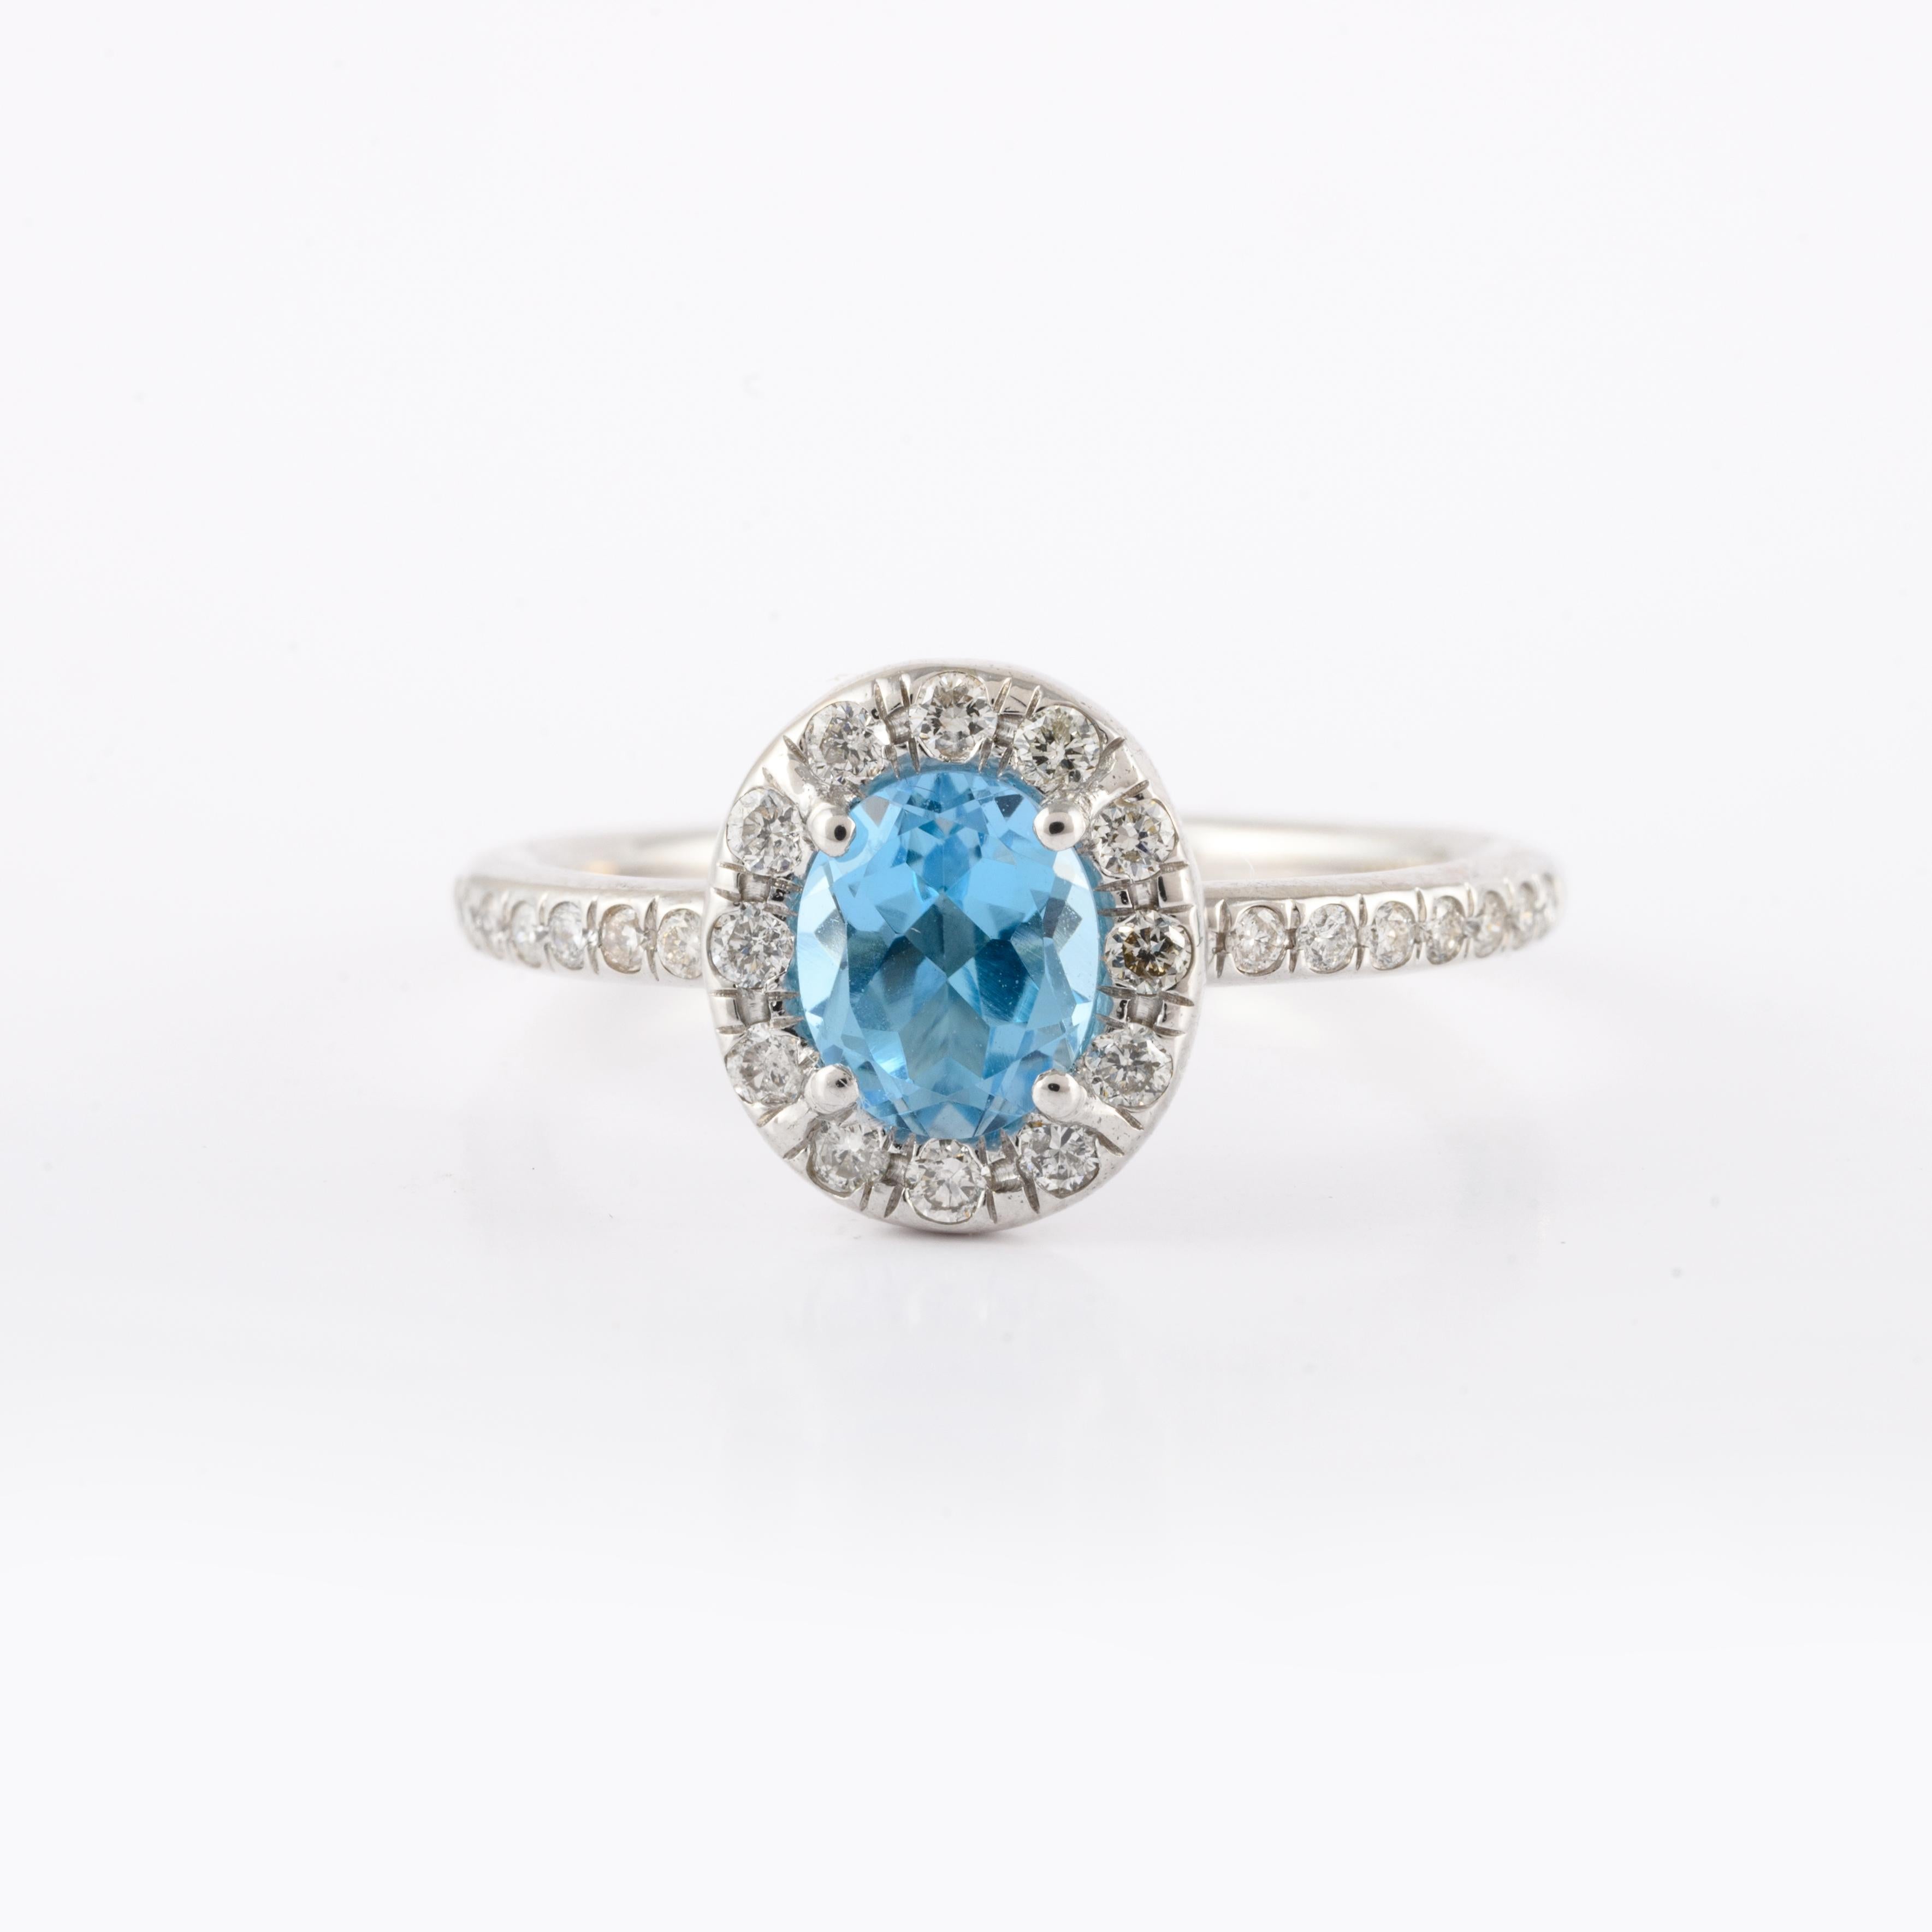 For Sale:  Dainty Blue Topaz and Diamond Halo Engagement Ring 14kt Solid White Gold 2